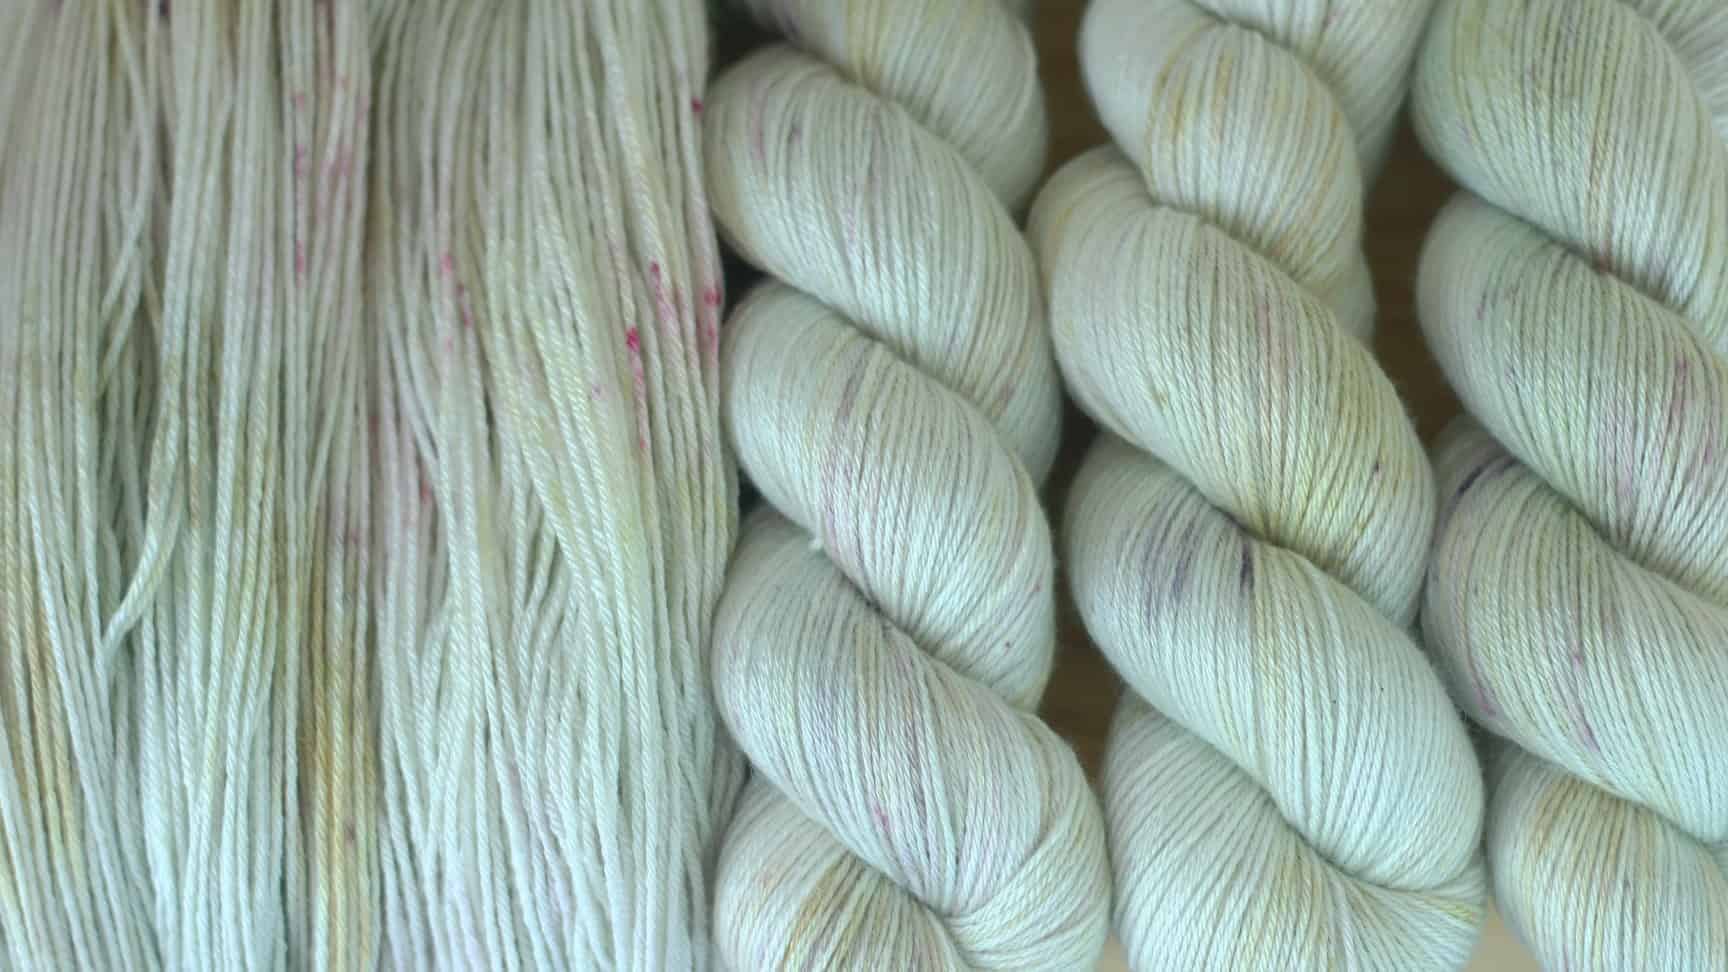 Cream yarn with pale pink, purple and gold speckles.